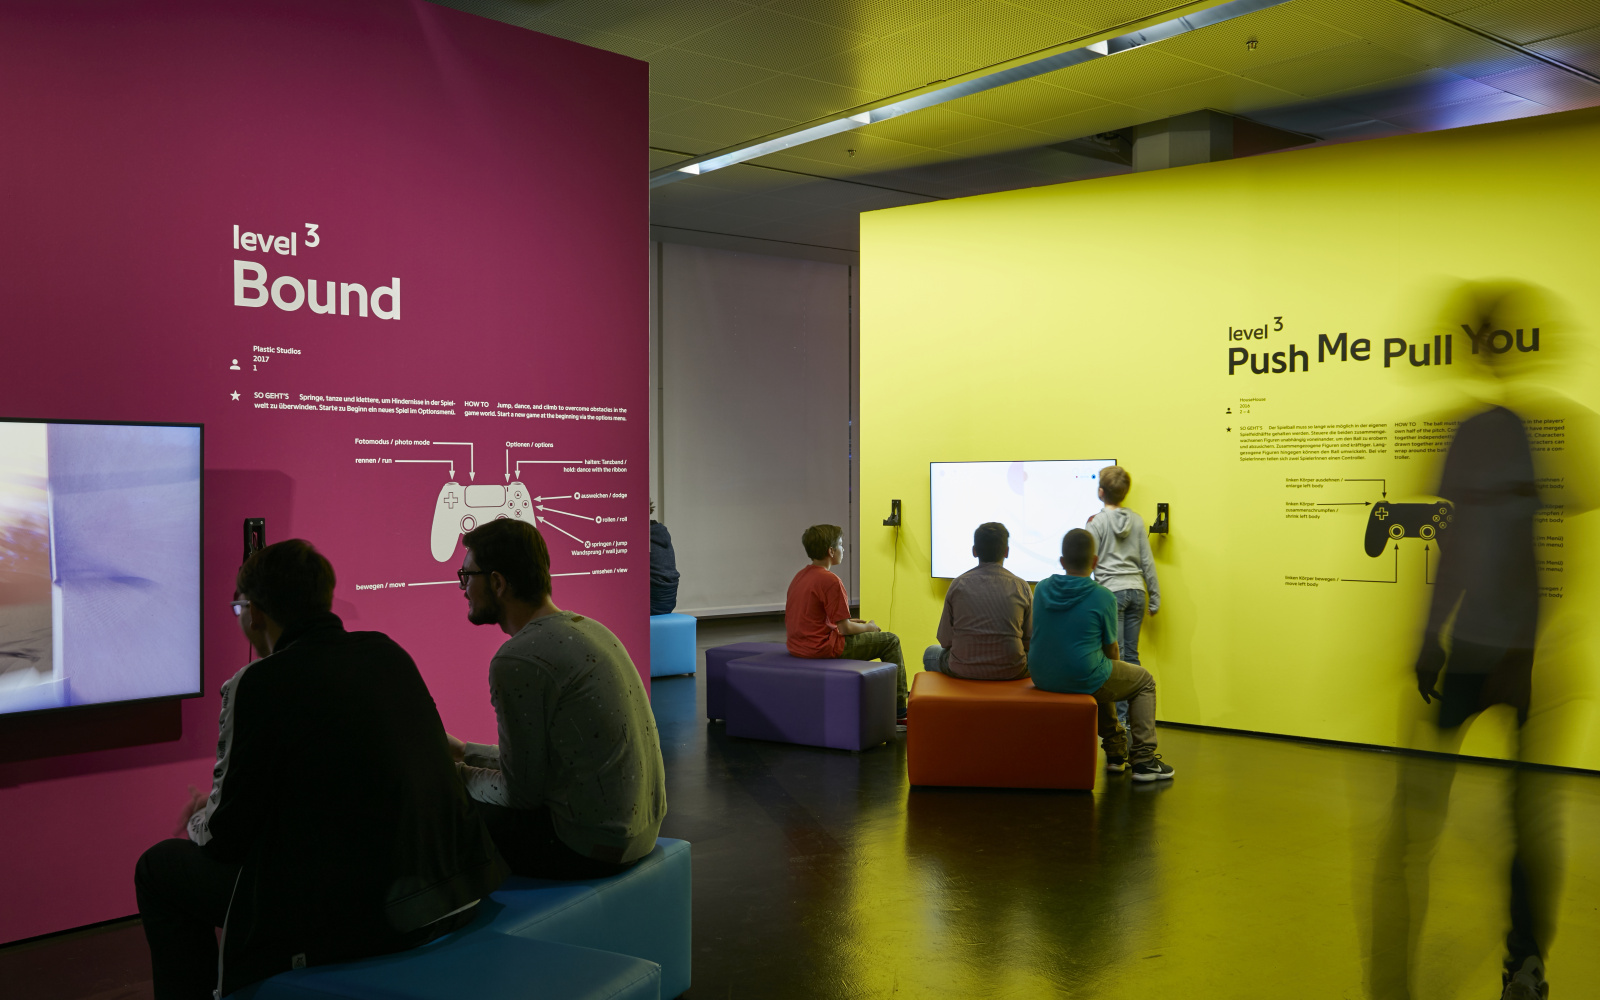 To the left in the foreground, two visitors sit on a bench in front of a screen attached to a collored wall. On the right in the background there are several young visitors sitting in front of a yellow wall with a screen.